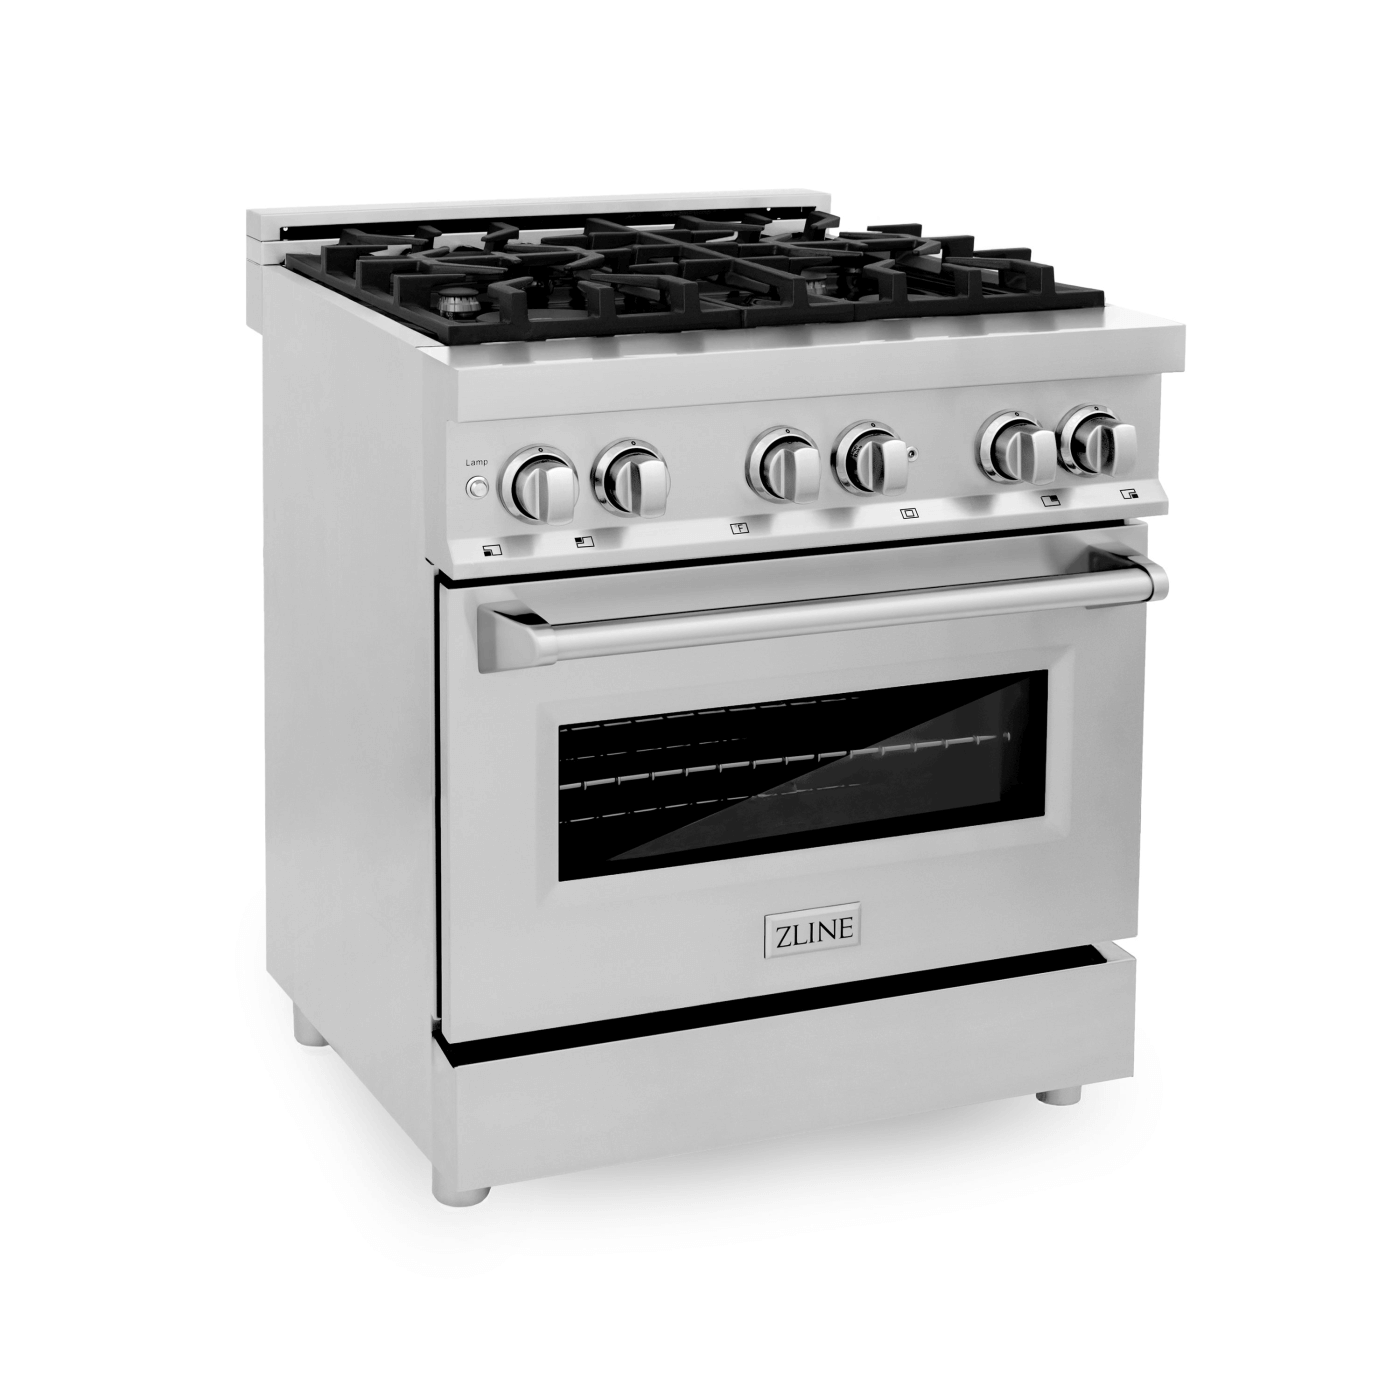 ZLINE 30 in. 4.0 cu. ft. Dual Fuel Range with Gas Stove and Electric Oven in Stainless Steel - white background